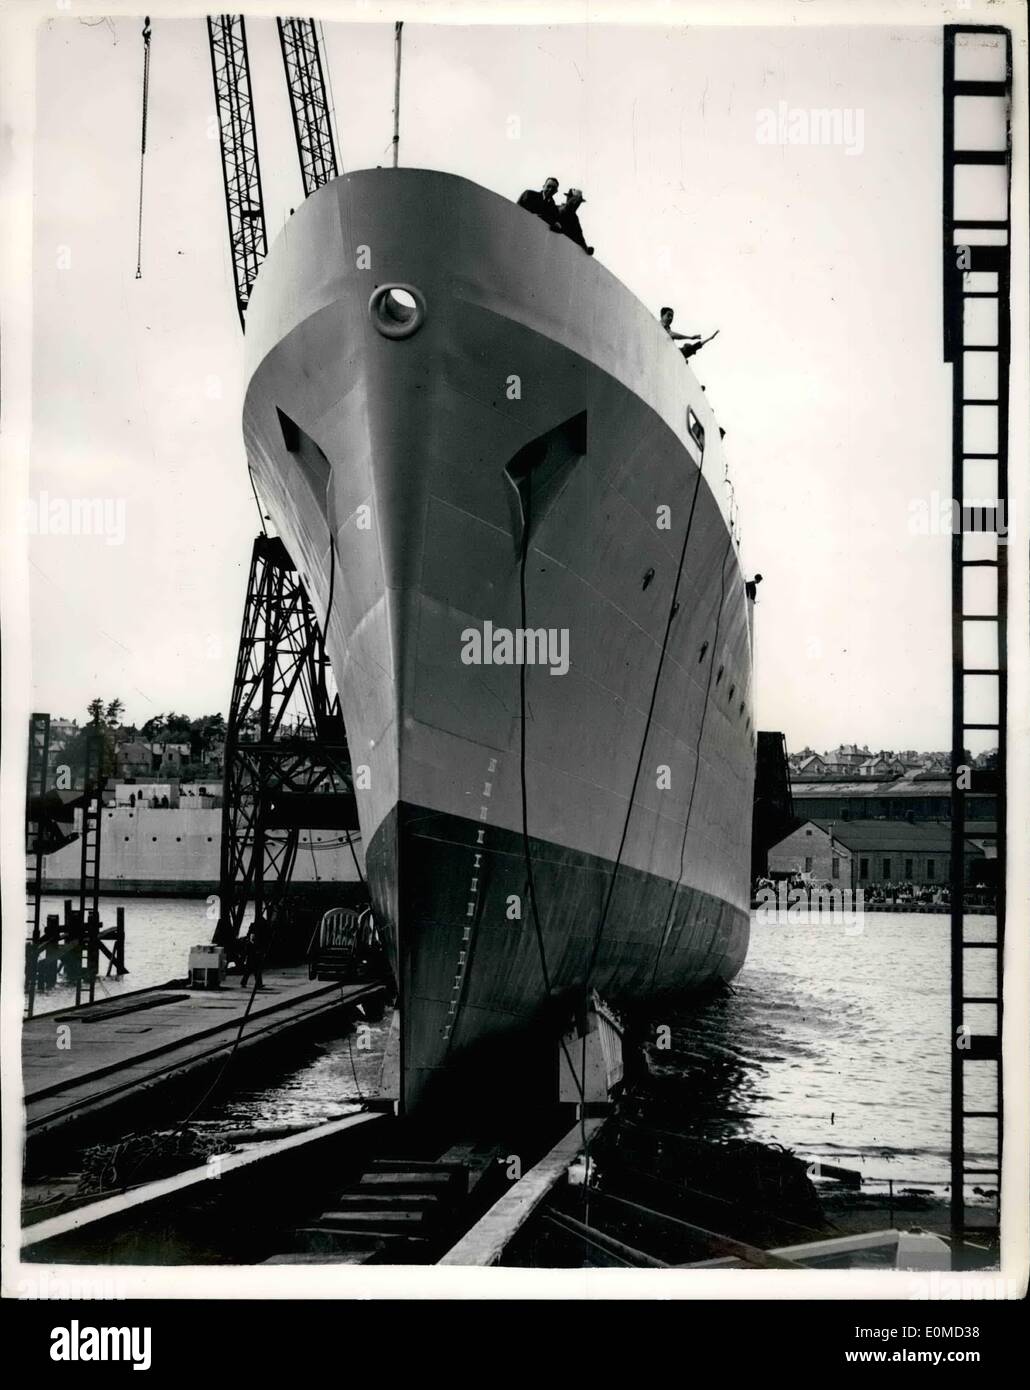 Sep. 09, 1954 - NEW ANTI-SUBMARINE FRIGATE LAMMED AT COWES.. H.M.S. GRAFTON. H.M.S. GRAFTON, an anti-aubmarine frigate was launched by LADY GRANTRAii, wife of ADMIRAL SIR GUT GRANTHAM K.C.B., C.B.E., D.S.O. who is to take over fmm Admiral Lord Mountbatten as C.iu C. Mediterranean - at the Samuel Whtto Shipyar, Cowes, this afternoon.. The vessel is 310 feet long turbines of adva,Awd designÃ¢â‚¬Å¾She is armed with three Bofors guns and two three-barrelled anti-submarine mortars of the same design as fitted to 0.0.s Stock Photo